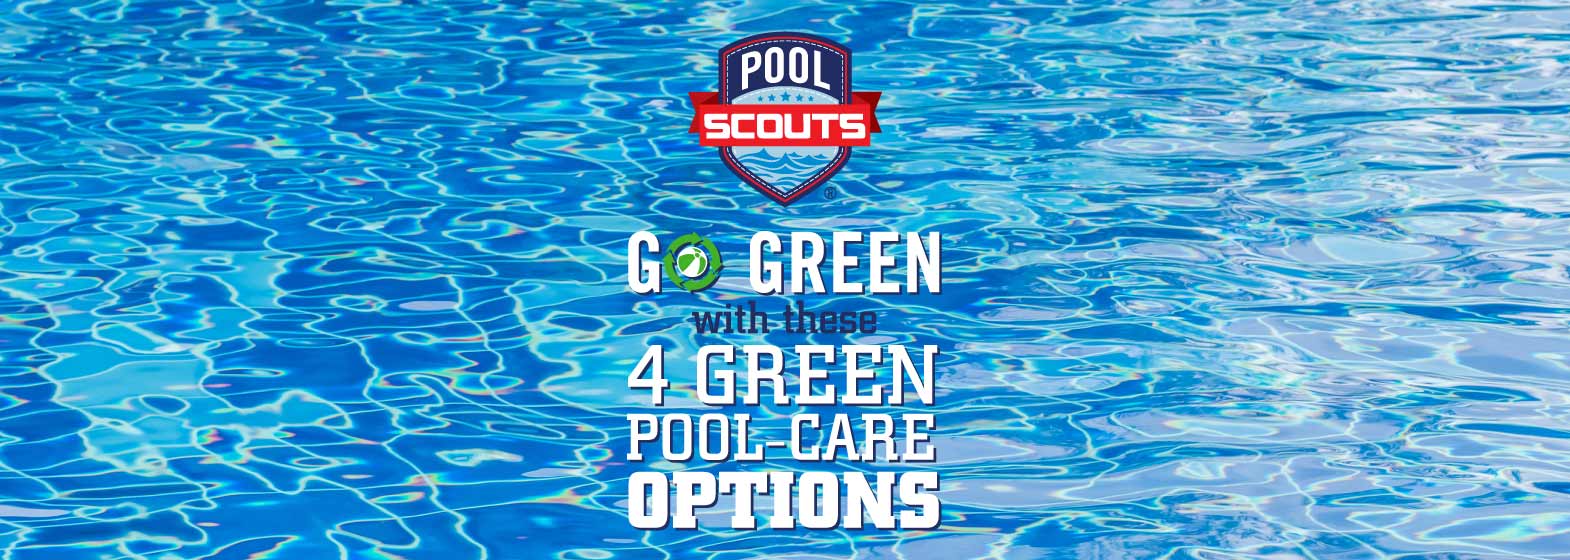 Image of Green Pool Care Options...Yes, We Said Green!